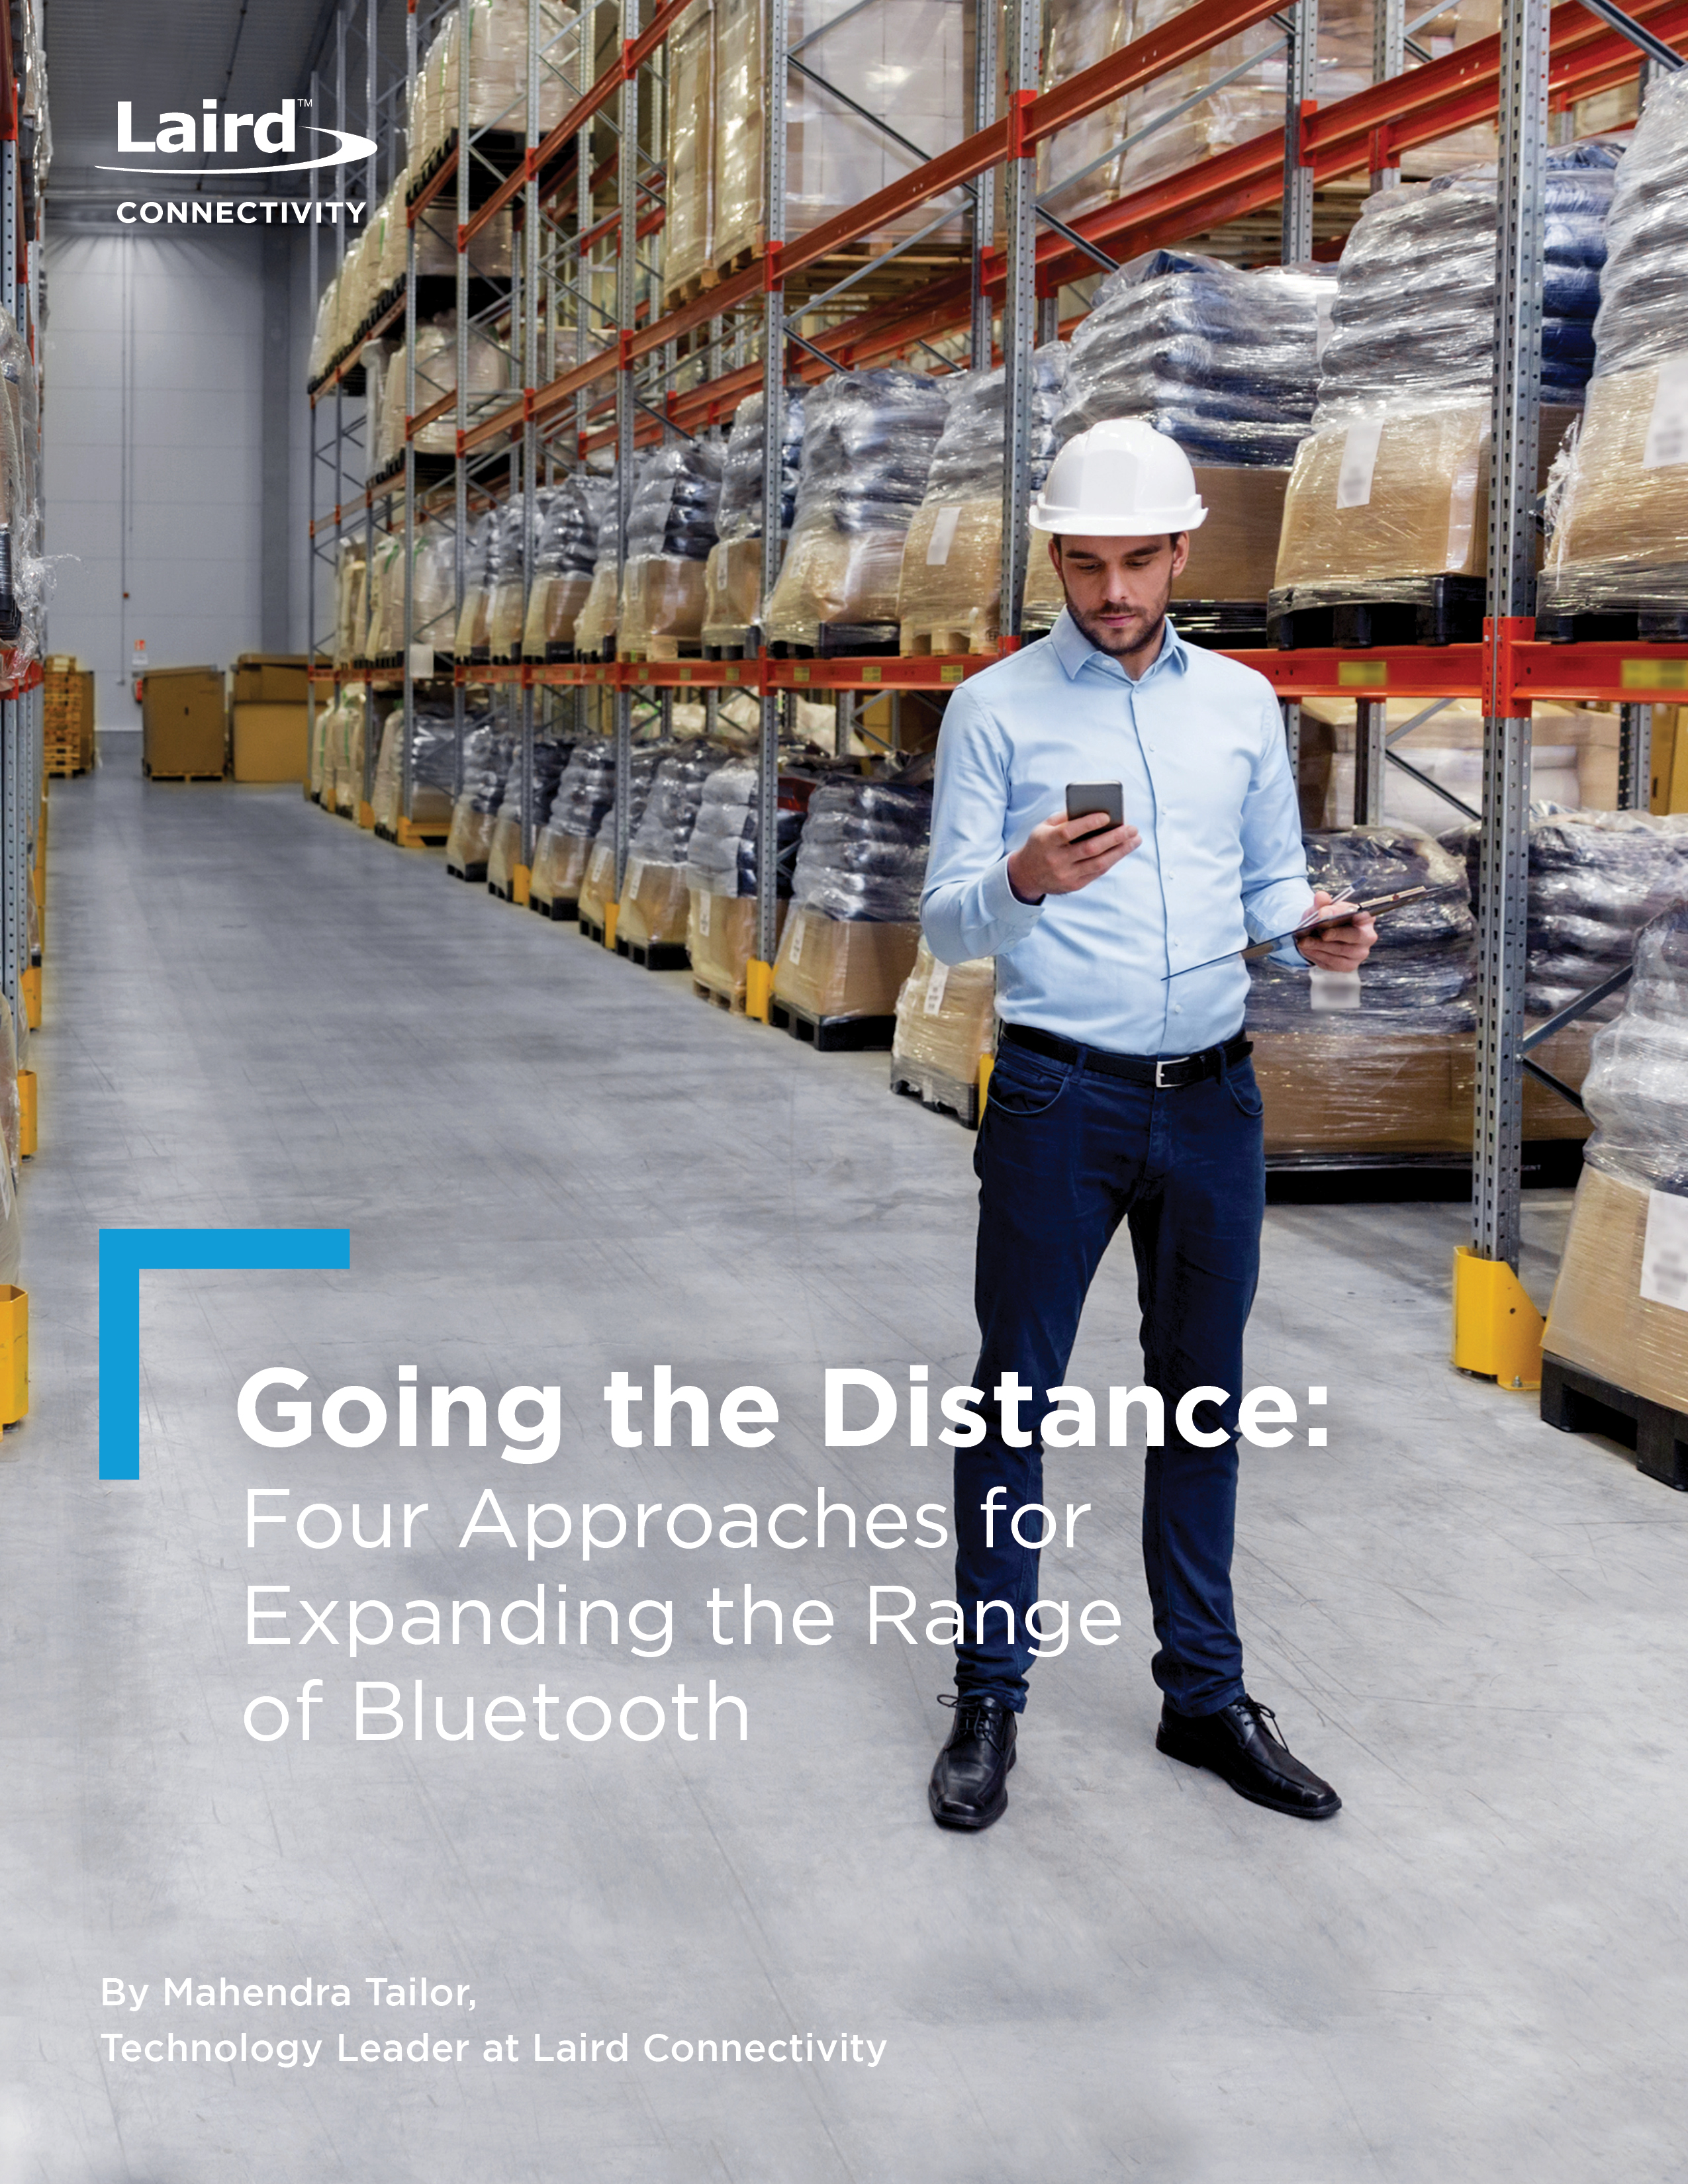 Four Approaches for Expanding the Range of Bluetooth 